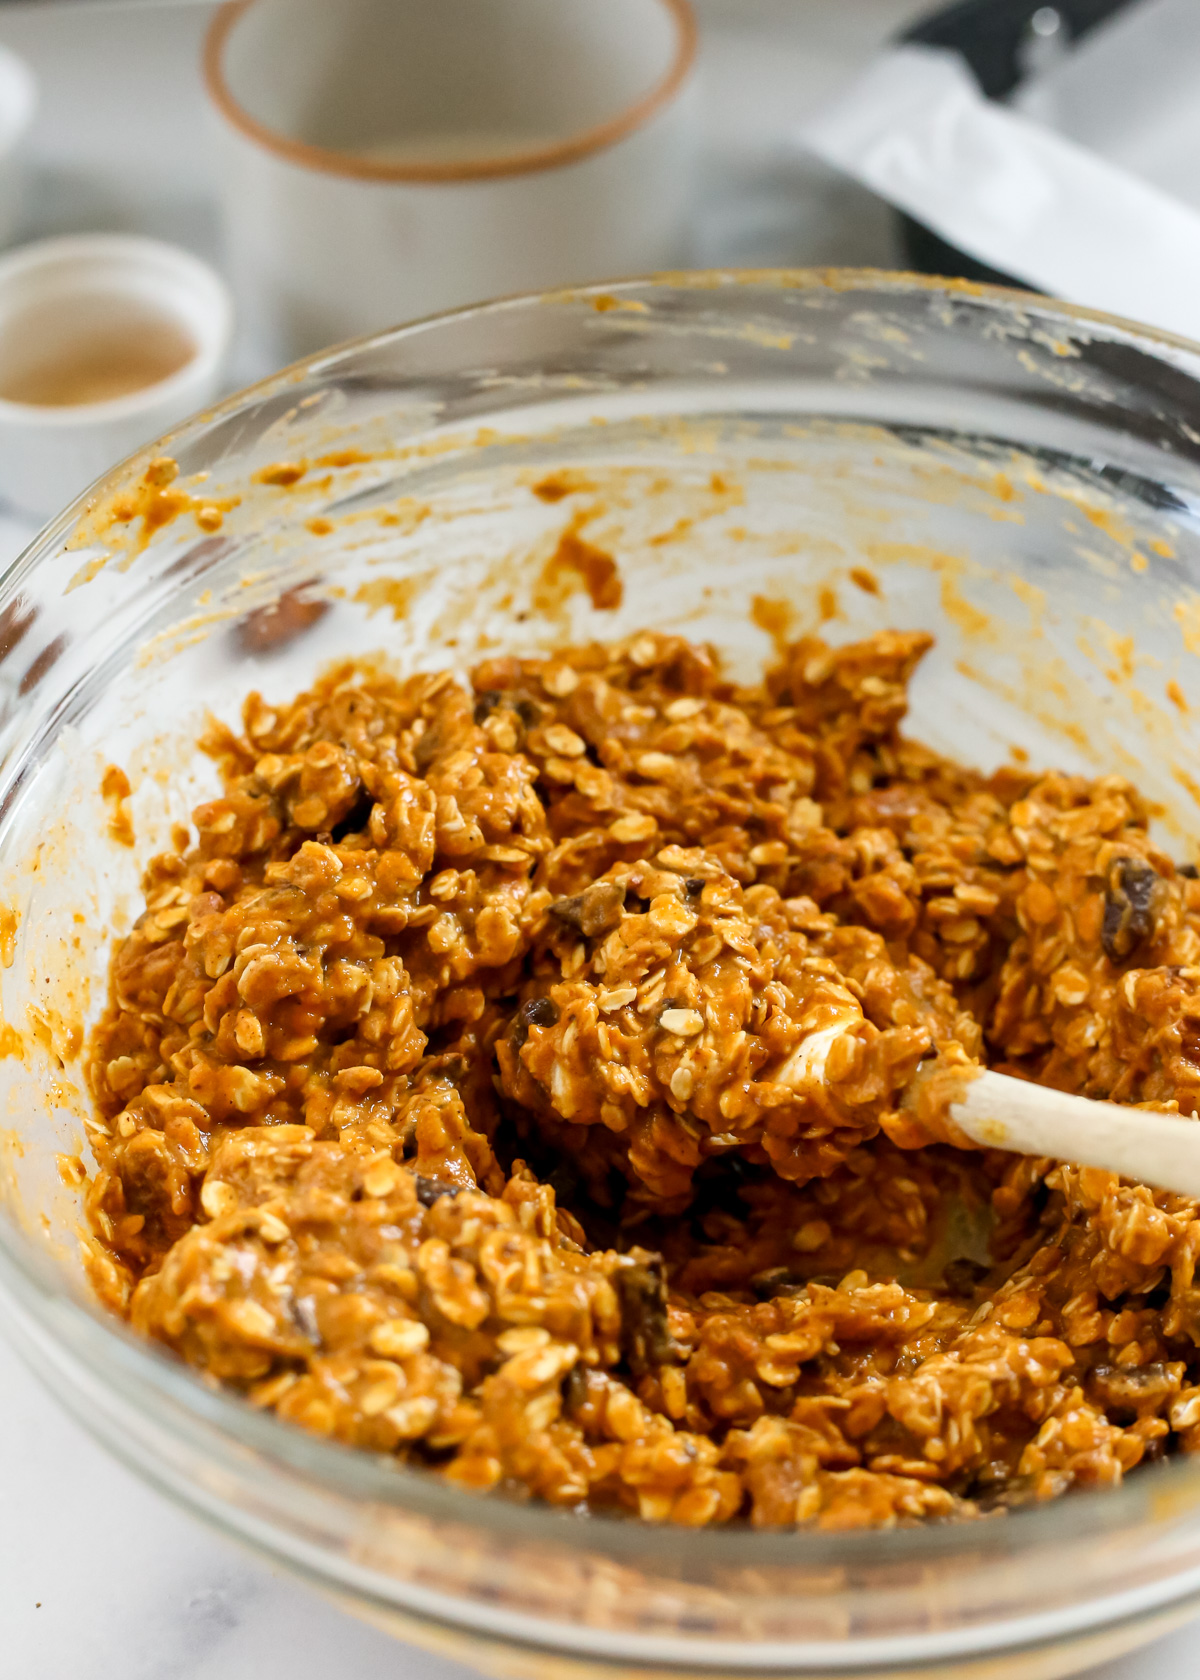 A small spatula rests on the side of a glass mixing bowls containing a mixture of oats, pureed pumpkin, brown sugar, pecans, and dark chocolate chunks, appearing bright orange in color and thick and sticky